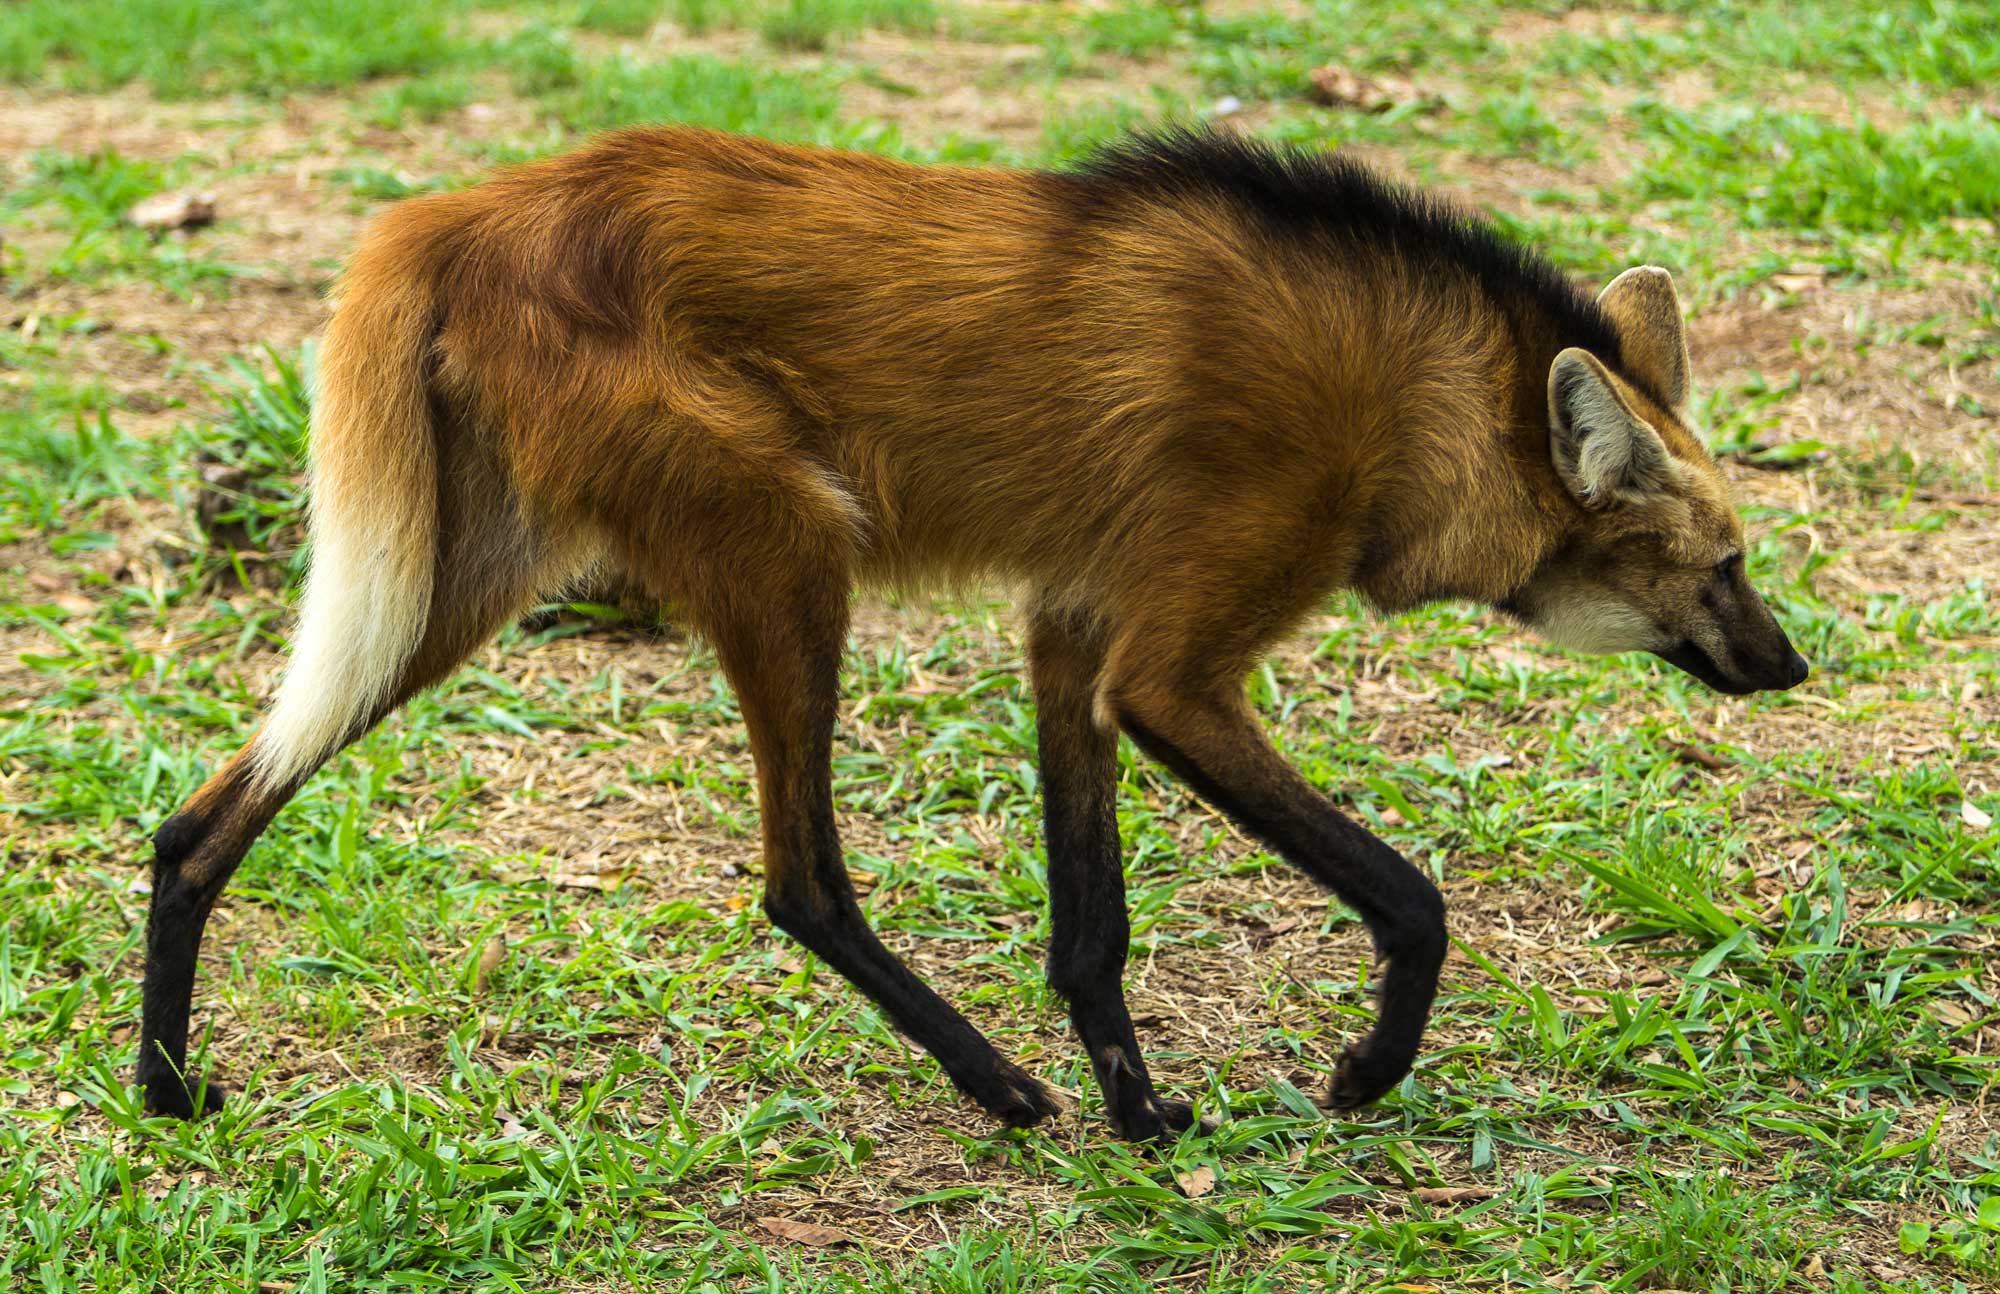 Photograph of a maned wolf walking on ground covered with short grass. The photo shows a brown, dog-like creature with long legs that are colored black in their lower halves. The animal has a medium-length tail, a dog-like head, and a line of black fur in the center of its back extending from its neck to just beyond its shoulder blades.